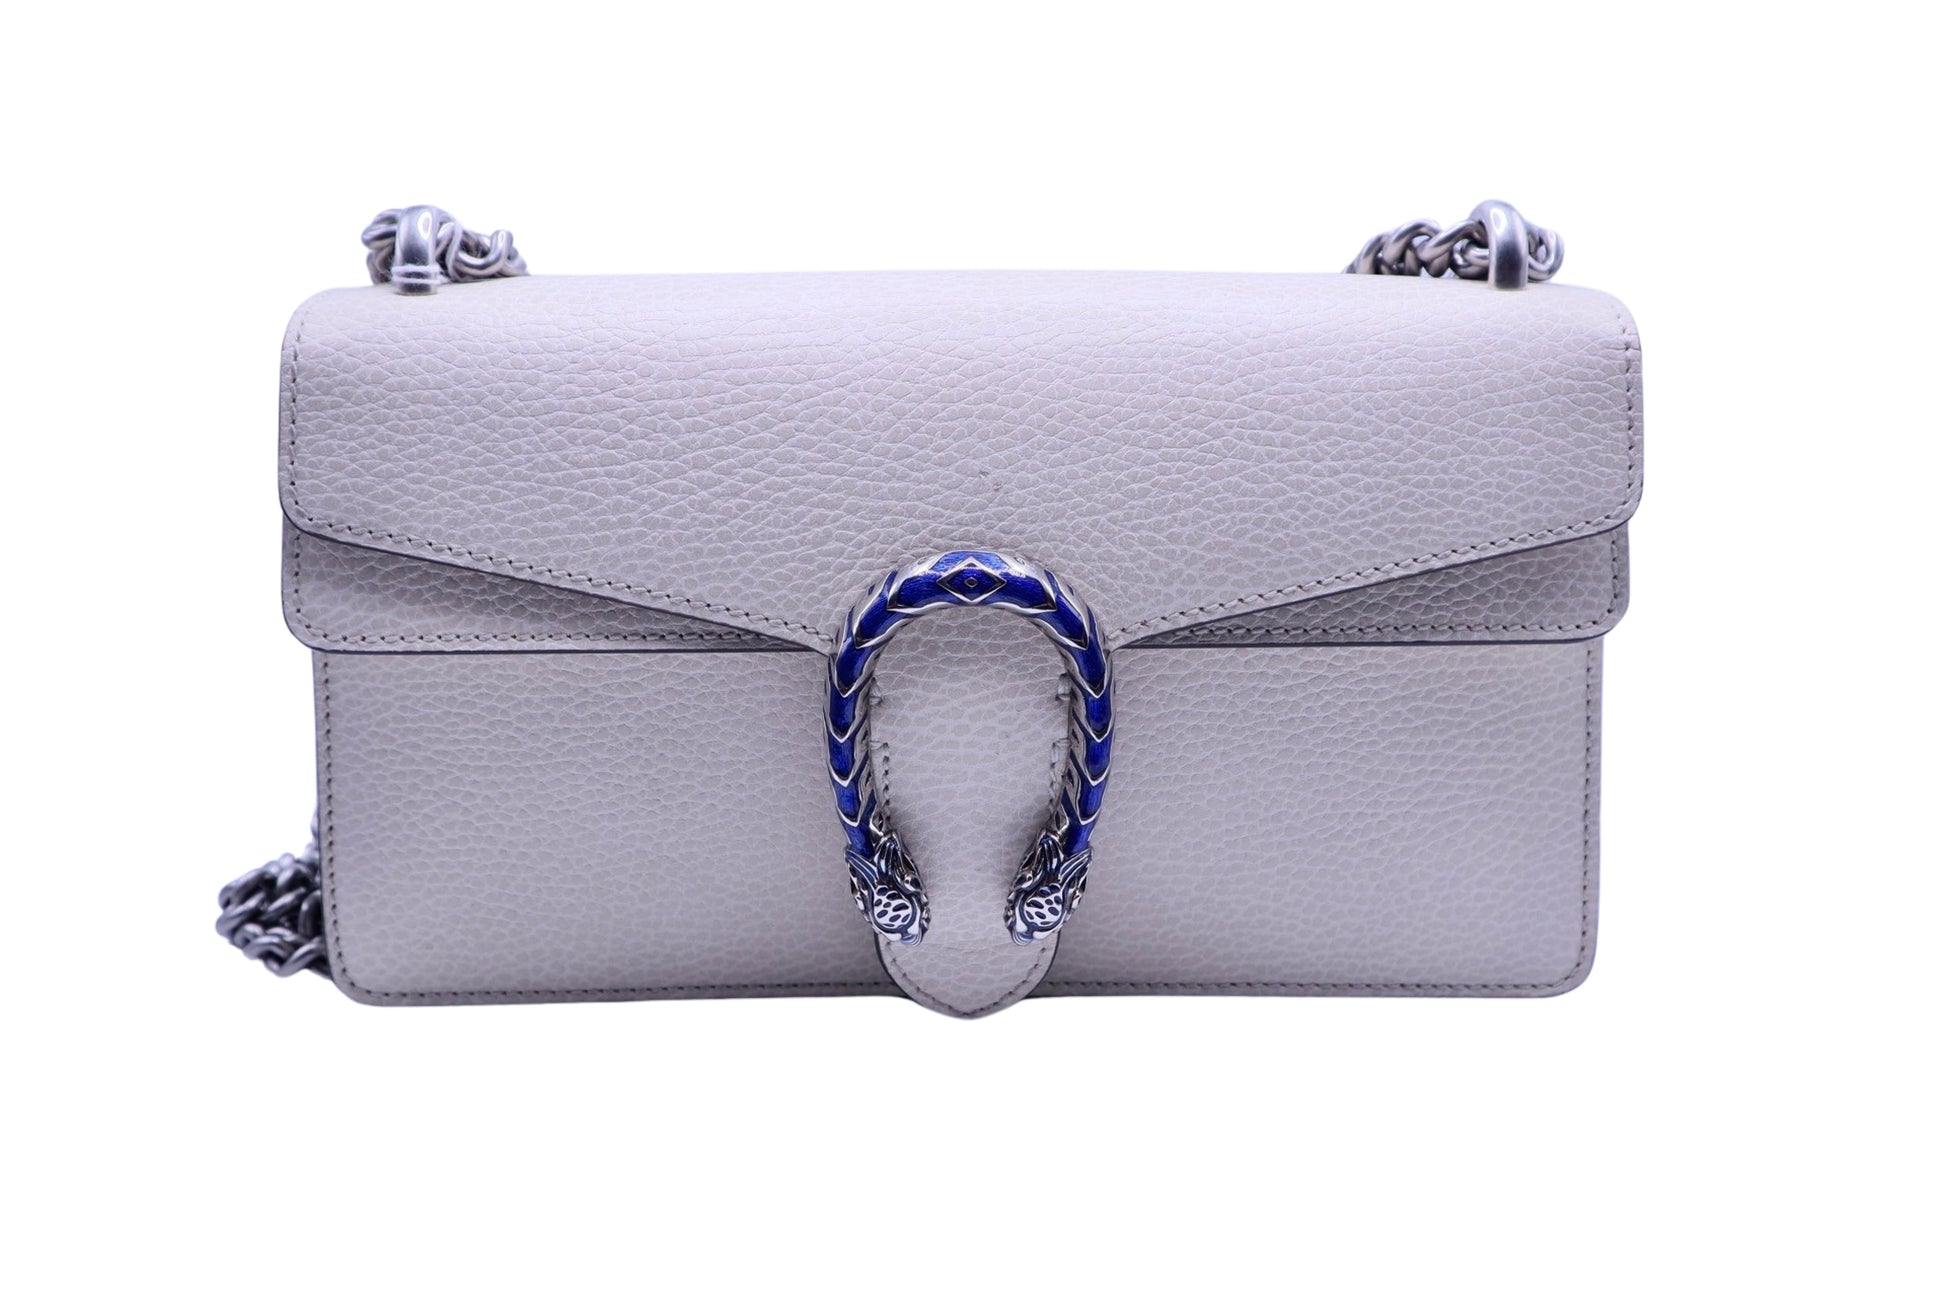 White textured leather gucci dionysus bag with small mark above the snake detail. Metal snake closure